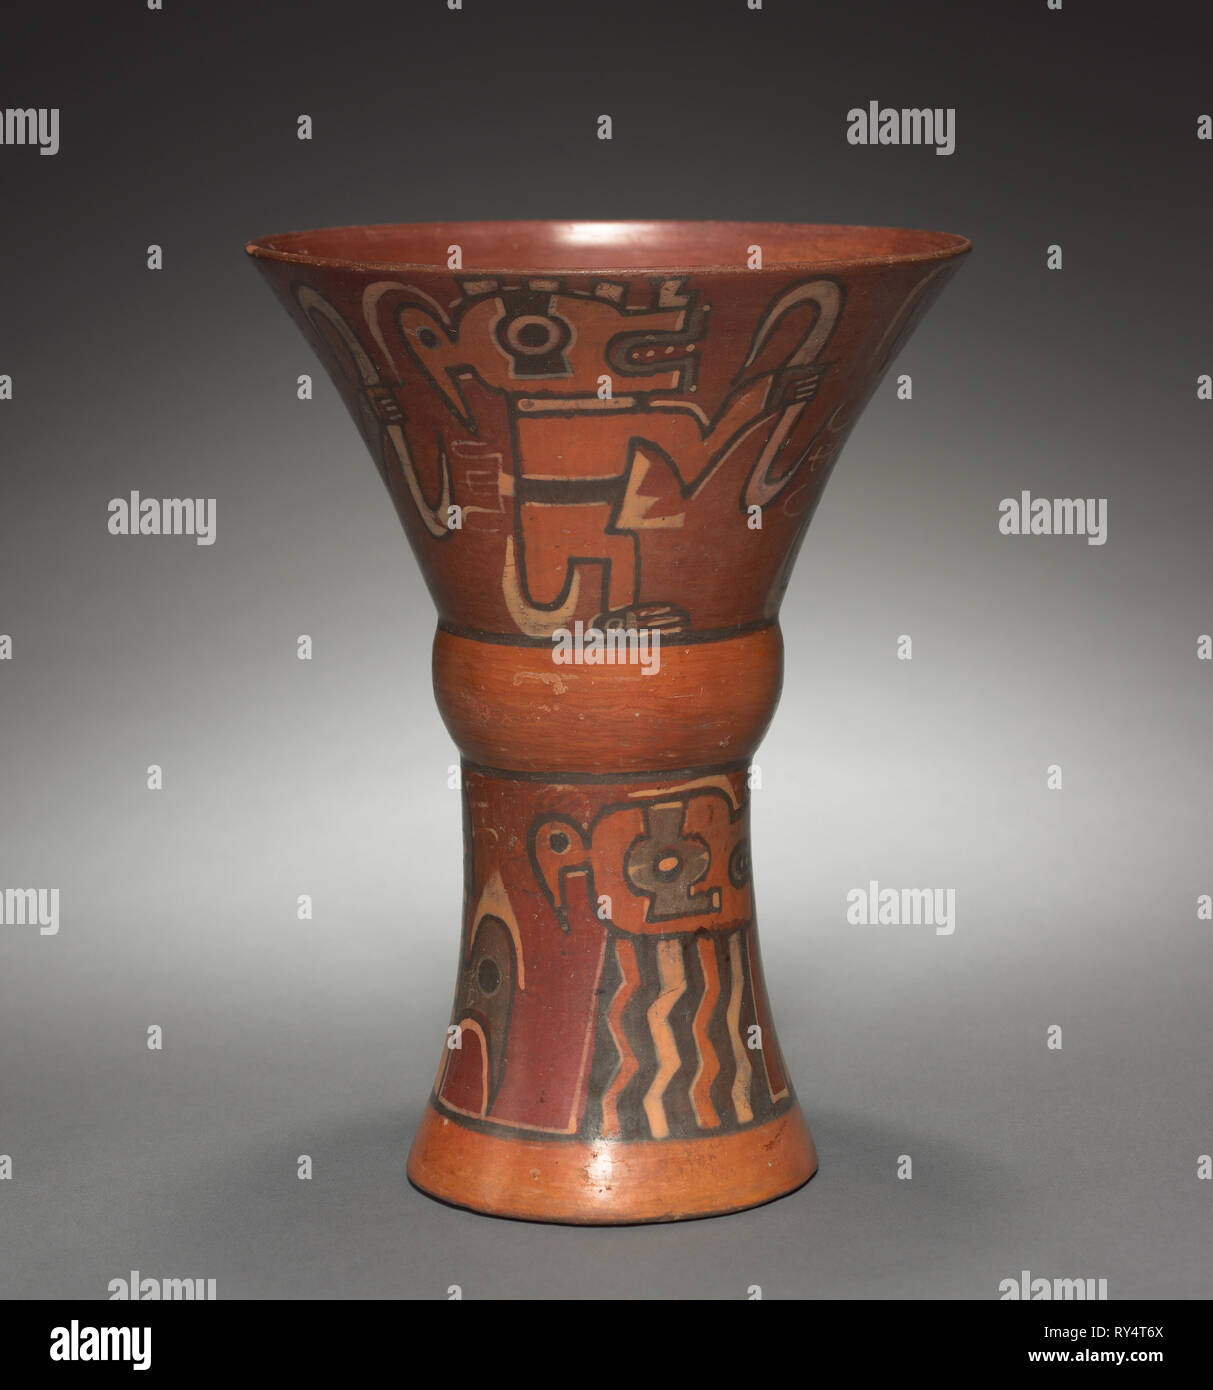 Kero (Waisted Cup), 400-1000. Bolivia, Cochabamba(?), Tiwanaku style, 400-1000. Earthenware with colored slips; overall: 22.3 x 17 cm (8 3/4 x 6 11/16 in Stock Photo